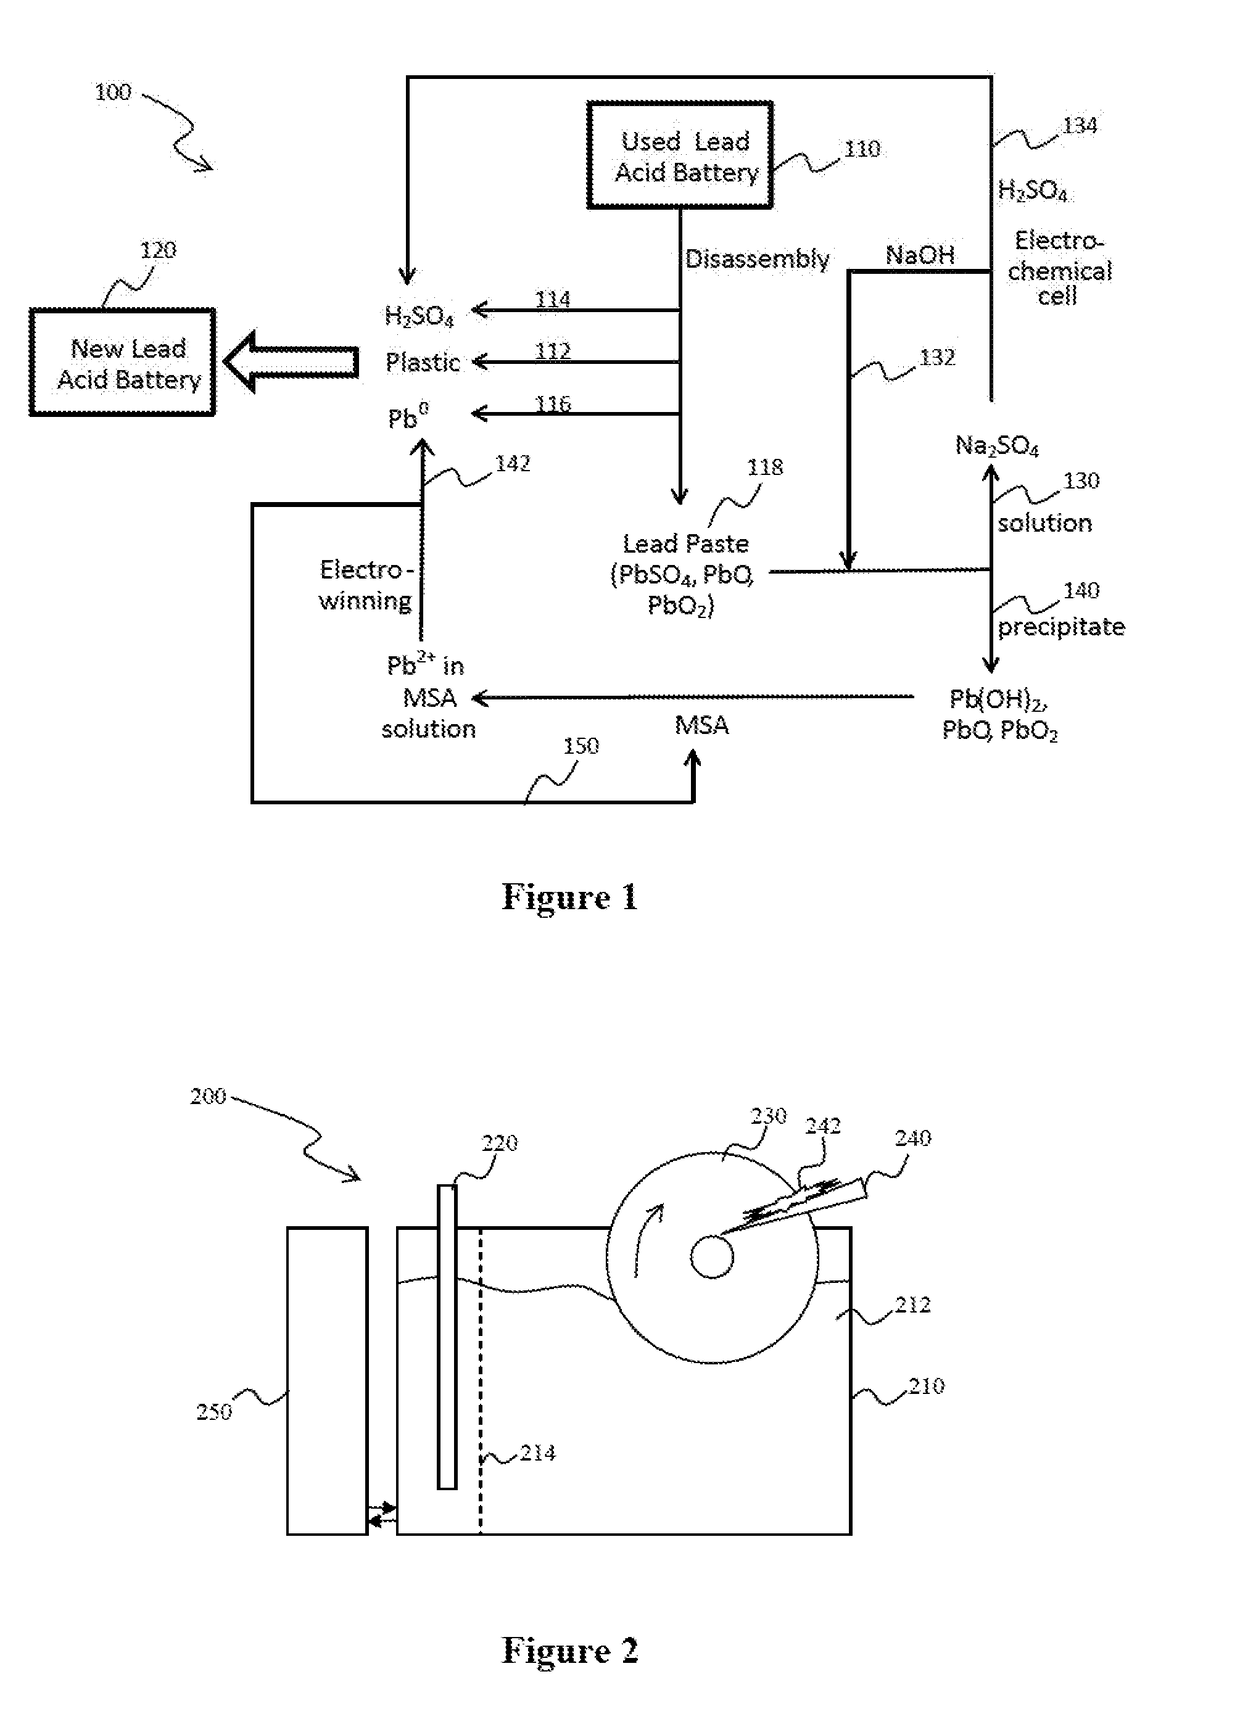 Closed Loop Systems and Methods for Recycling Lead Acid Batteries